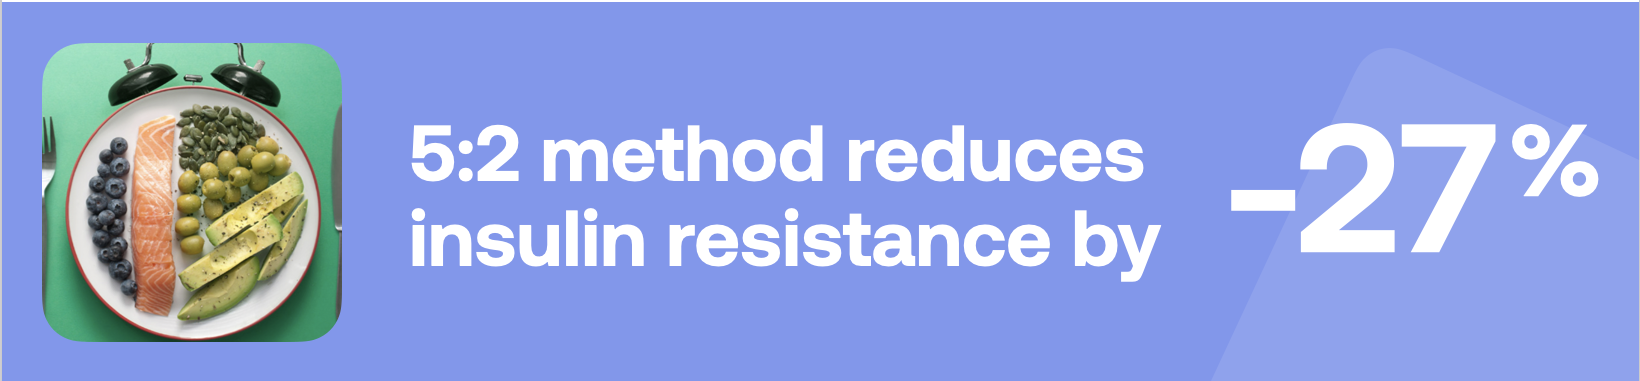 5:2 method reduces insulin resistance by 27%